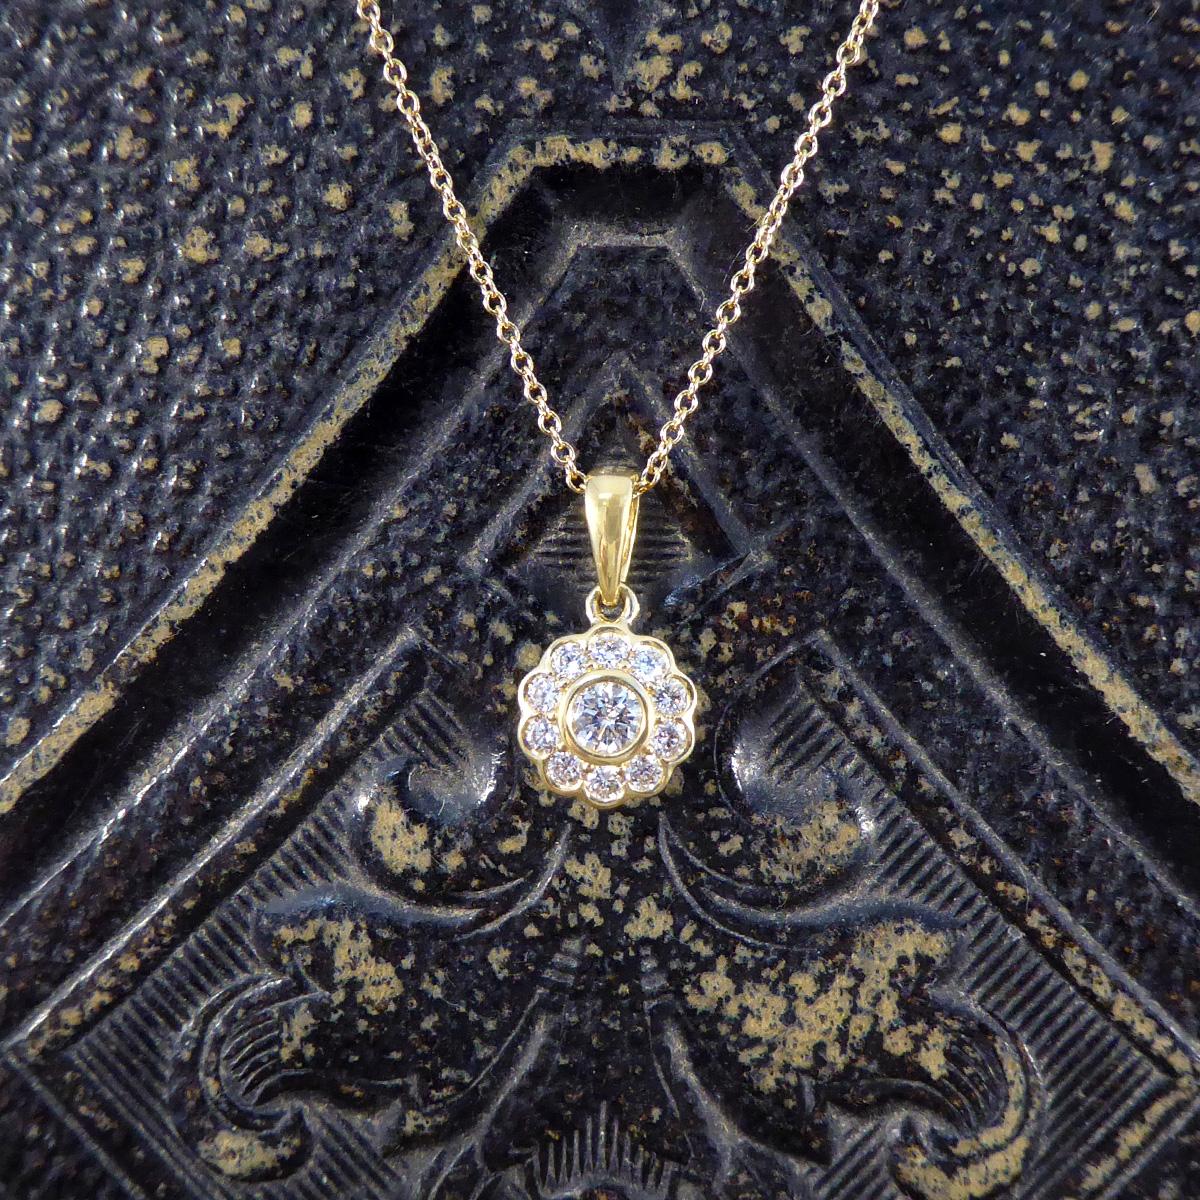 A beautifully sparkly Diamond cluster necklace. Featuring in the centre of this pendant is a 0.12ct Diamond in a bezel setting with a surround of ten slightly smaller Diamonds giving it a floral style with a total of 0.30ct. This piece is fully set